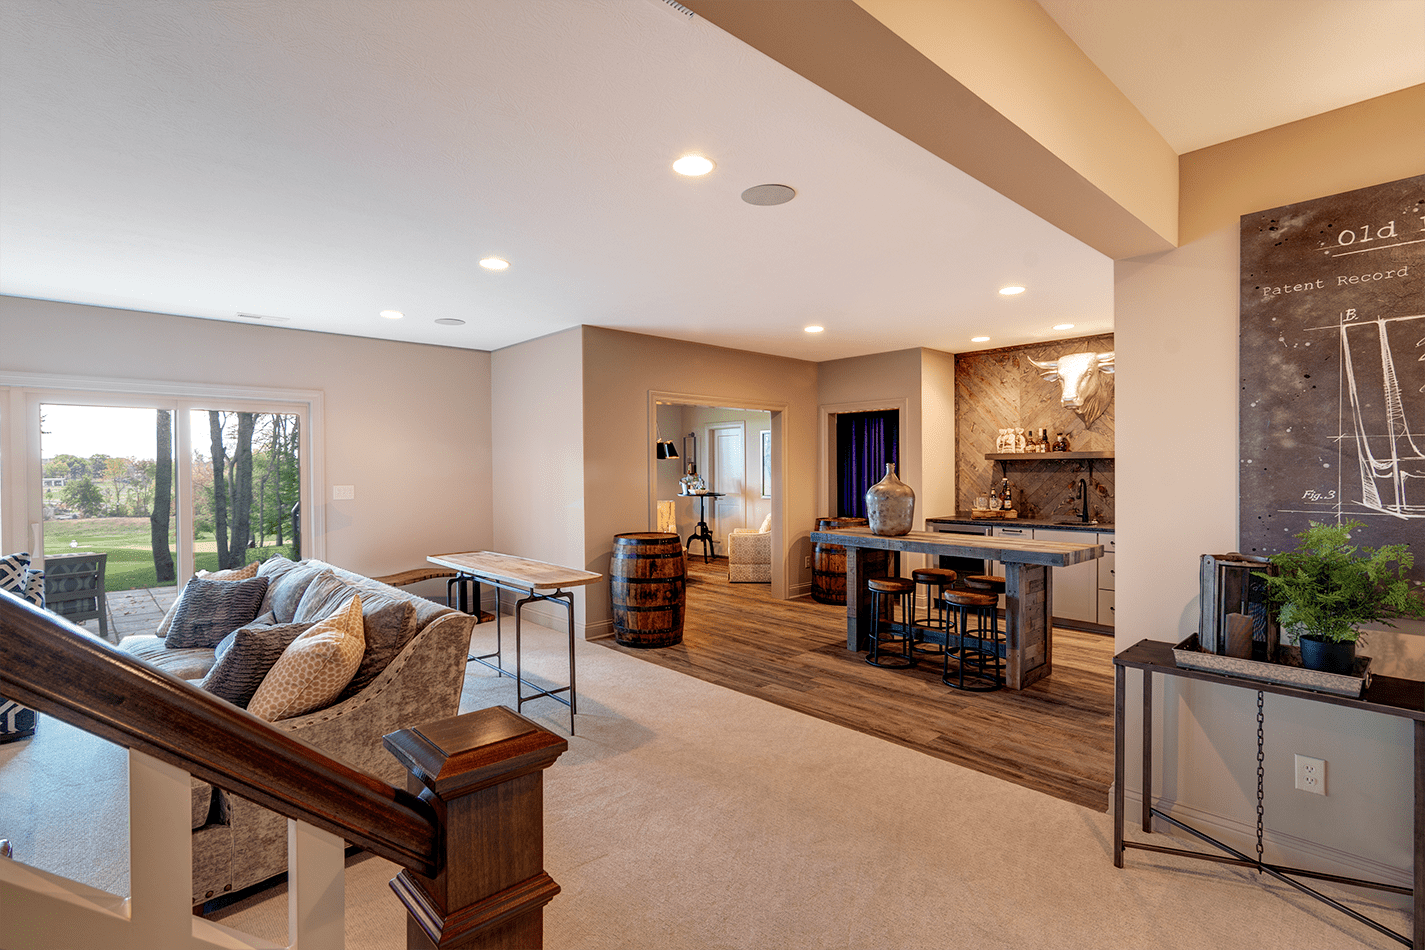 Is The Cost Of A Basement Worth It In Your Carmel Custom Home?